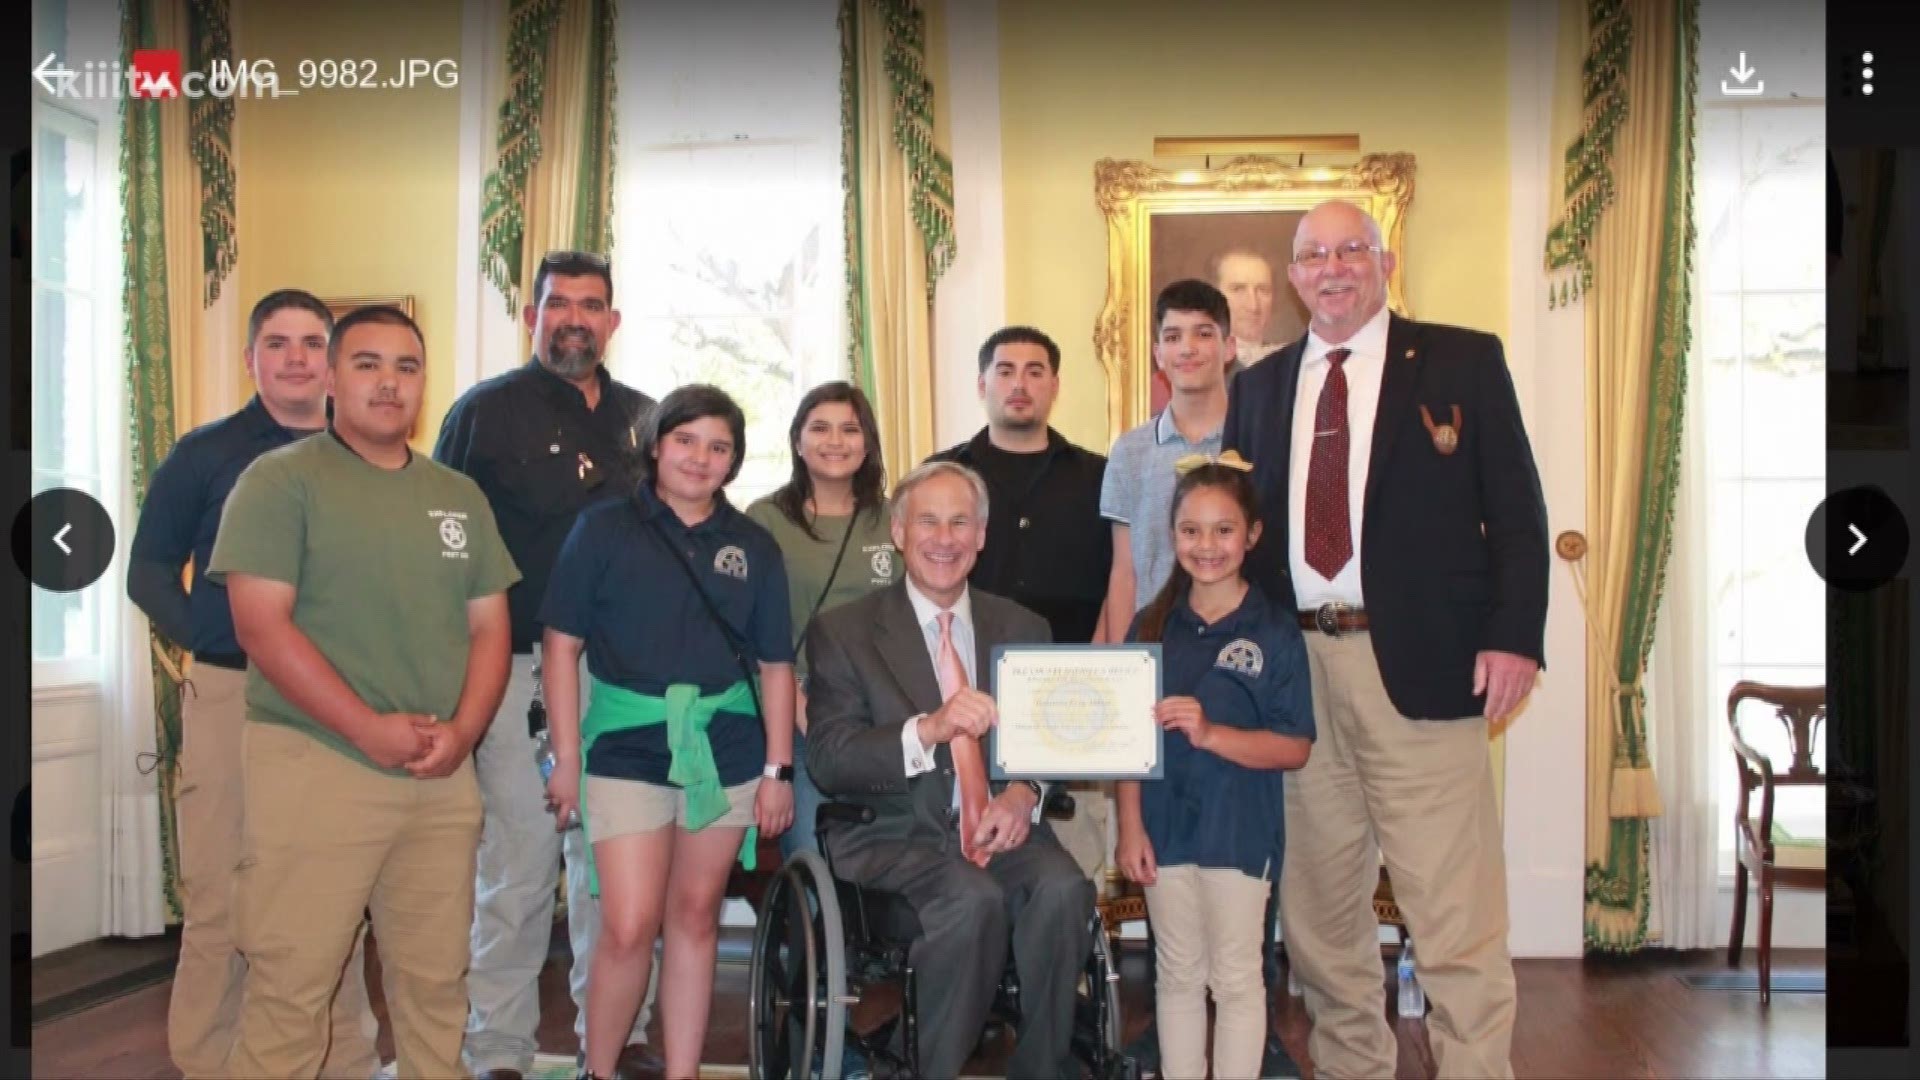 Texas Governor Greg Abbott had quite the honor at the state capitol thanks to a group of kids from Bee County.